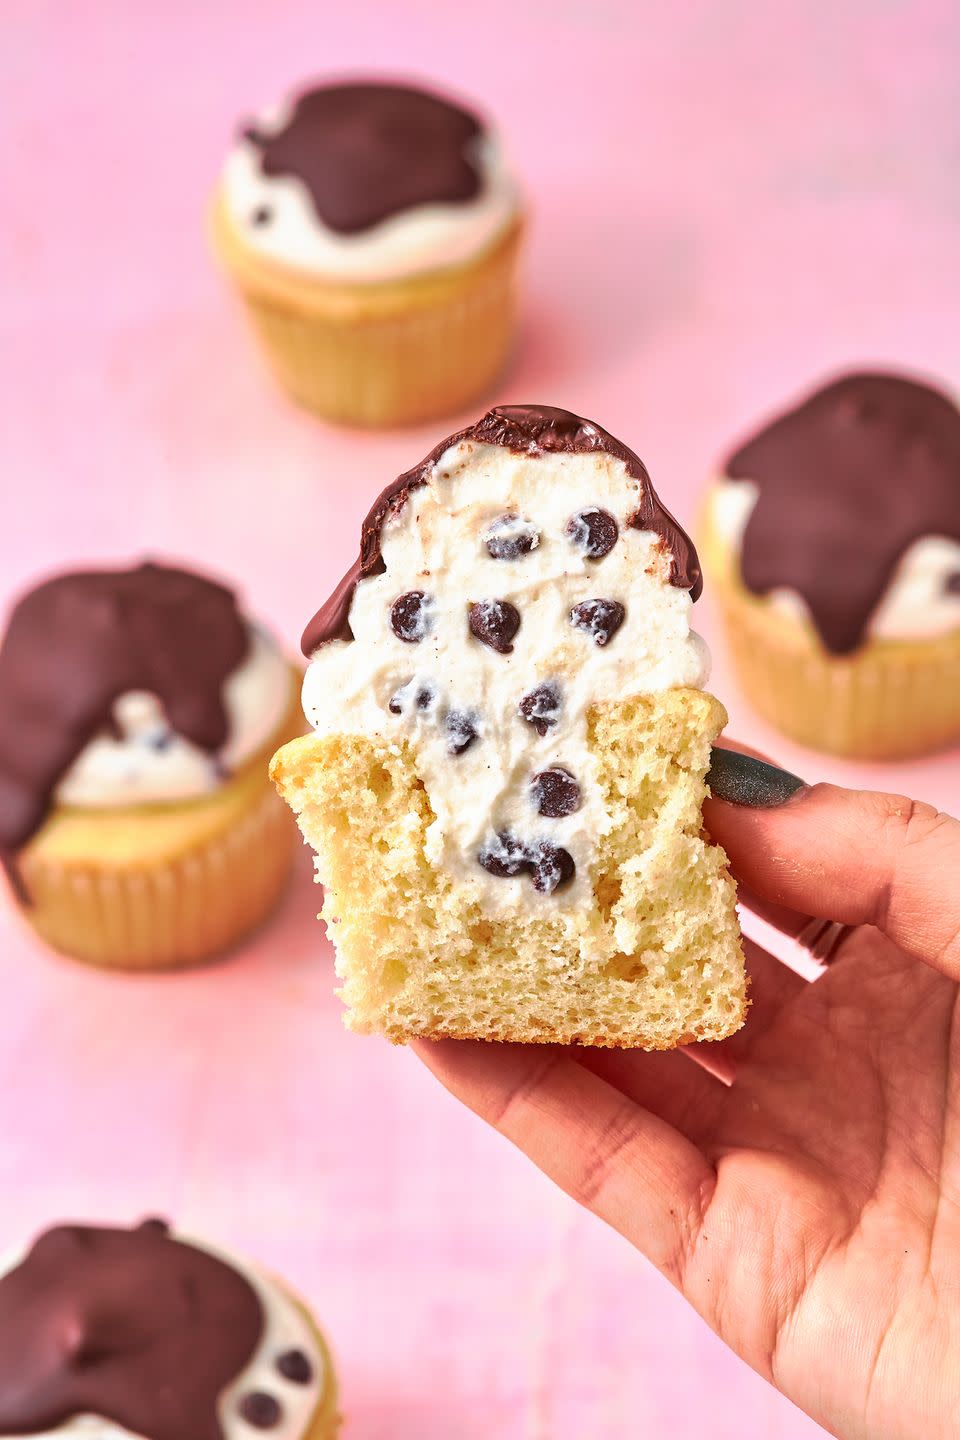 <p>Two desserts in one? It's a Christmas miracle.</p><p>Get the recipe from <a href="https://www.delish.com/cooking/recipe-ideas/recipes/a54001/cannoli-cupcakes-recipe/" rel="nofollow noopener" target="_blank" data-ylk="slk:Delish" class="link rapid-noclick-resp">Delish</a>.</p>